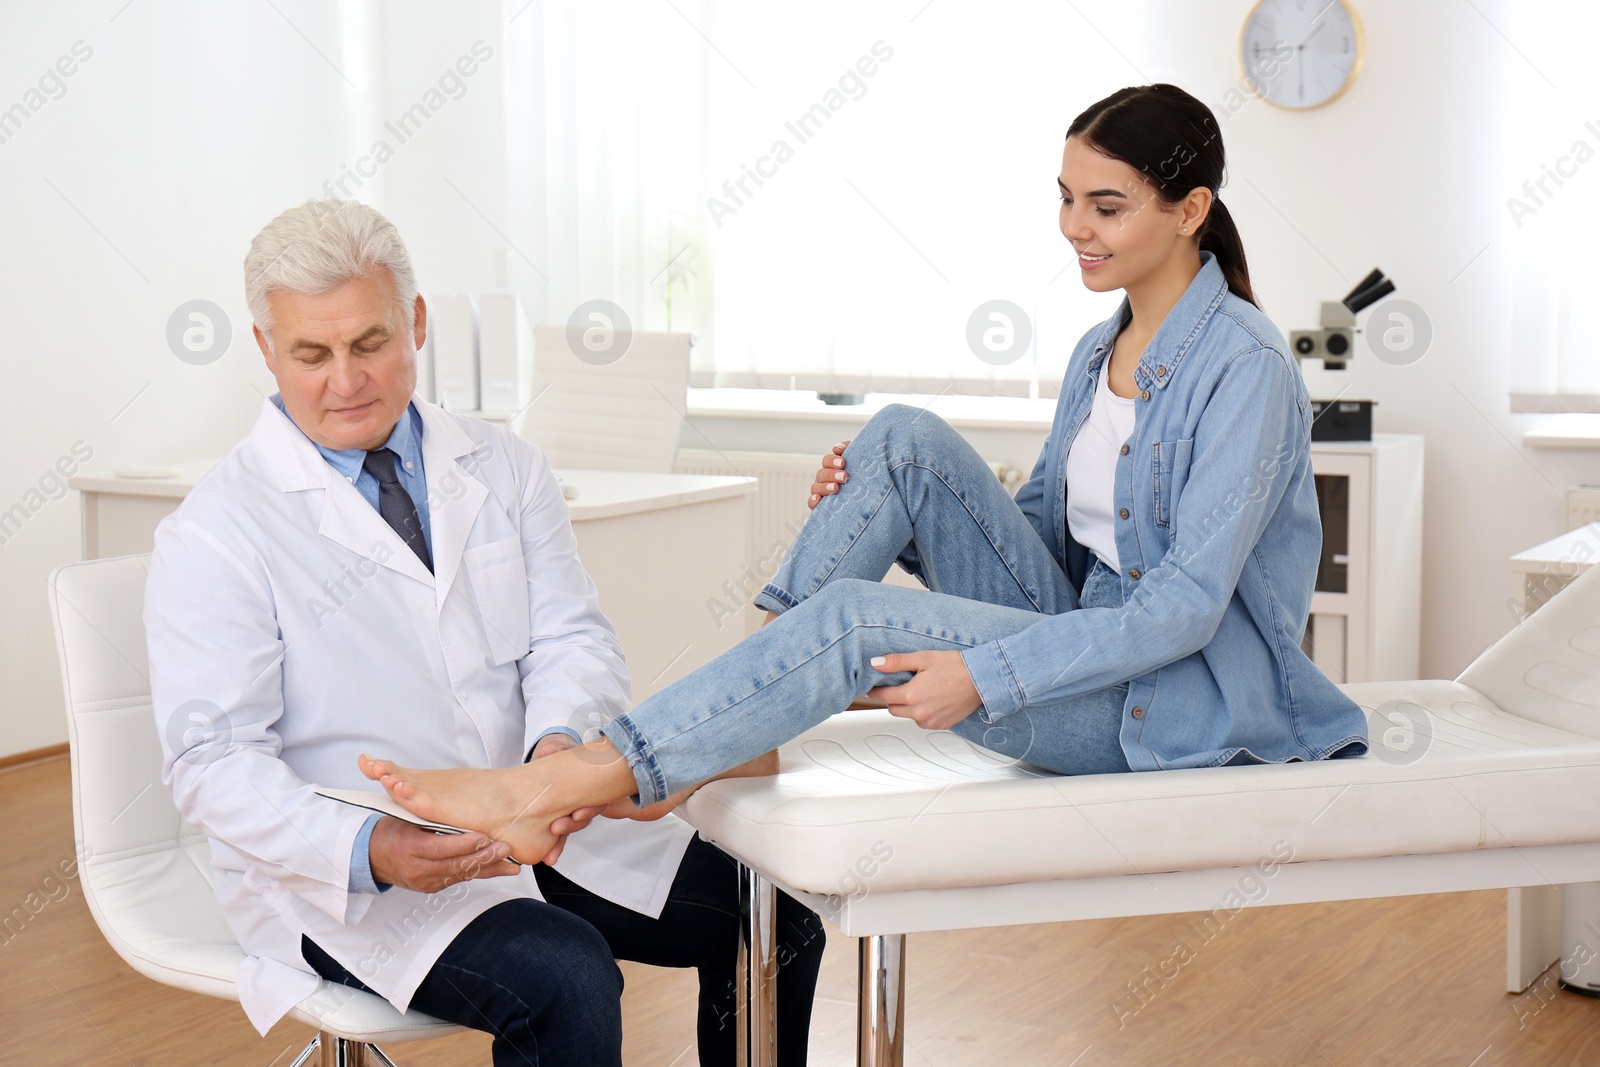 Photo of Male orthopedist fitting insole on patient's foot in clinic